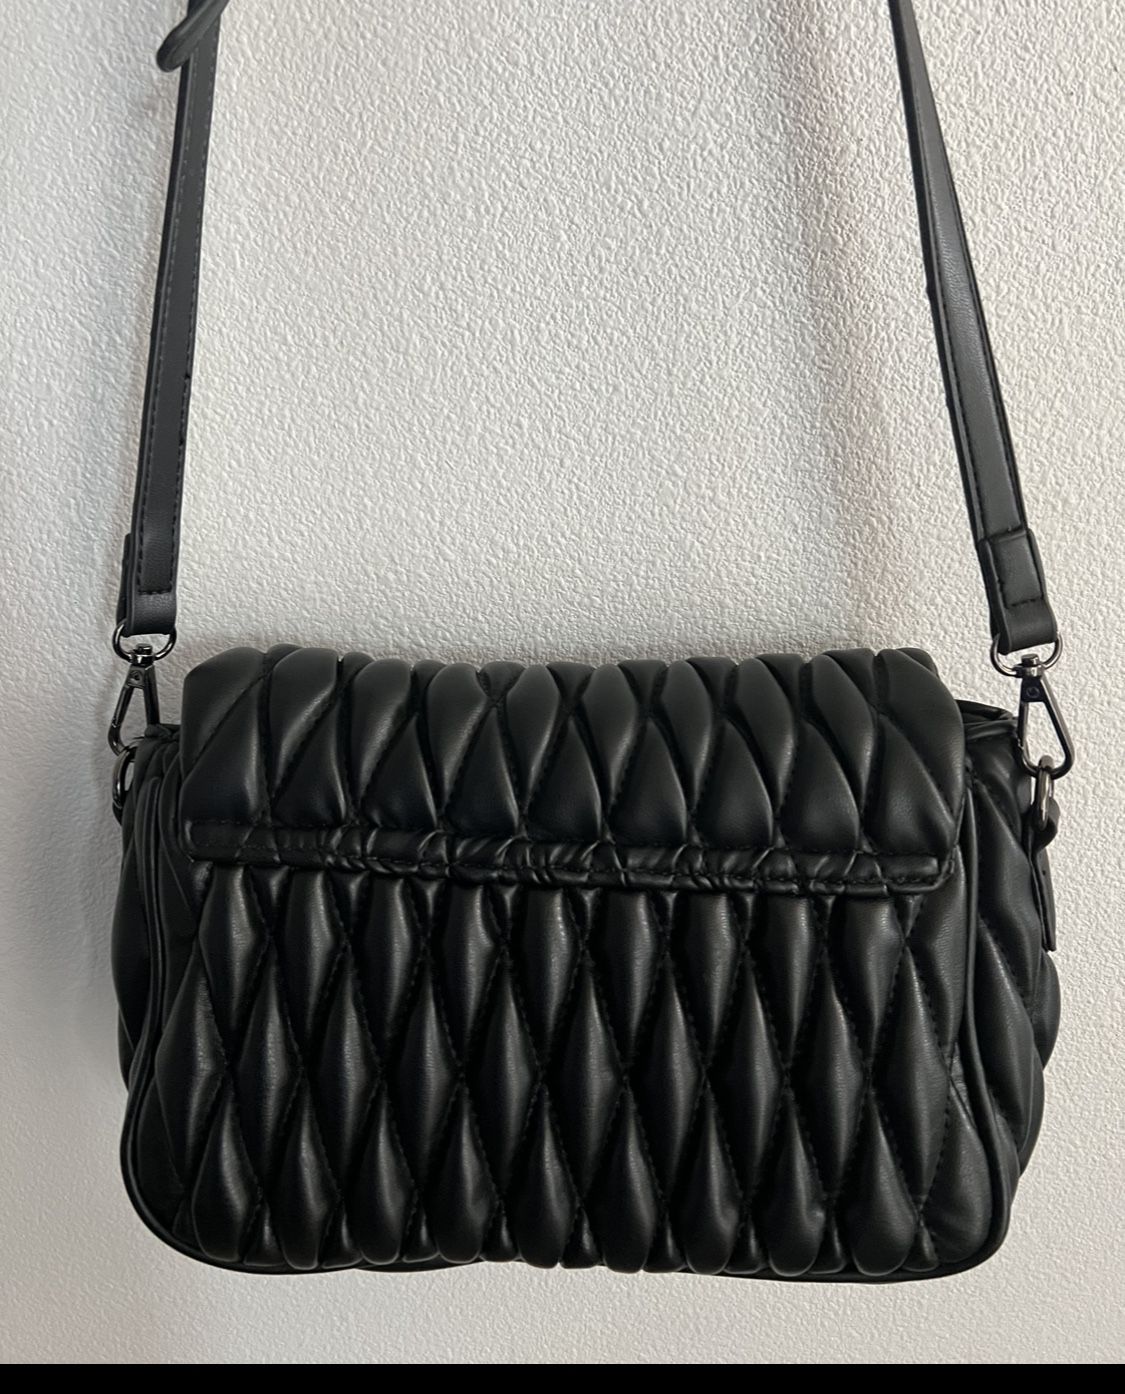 BADGLEY MISCHKA Black Quilted VEGAN Faux Leather Womens Crossbody Bag  $40 OBO